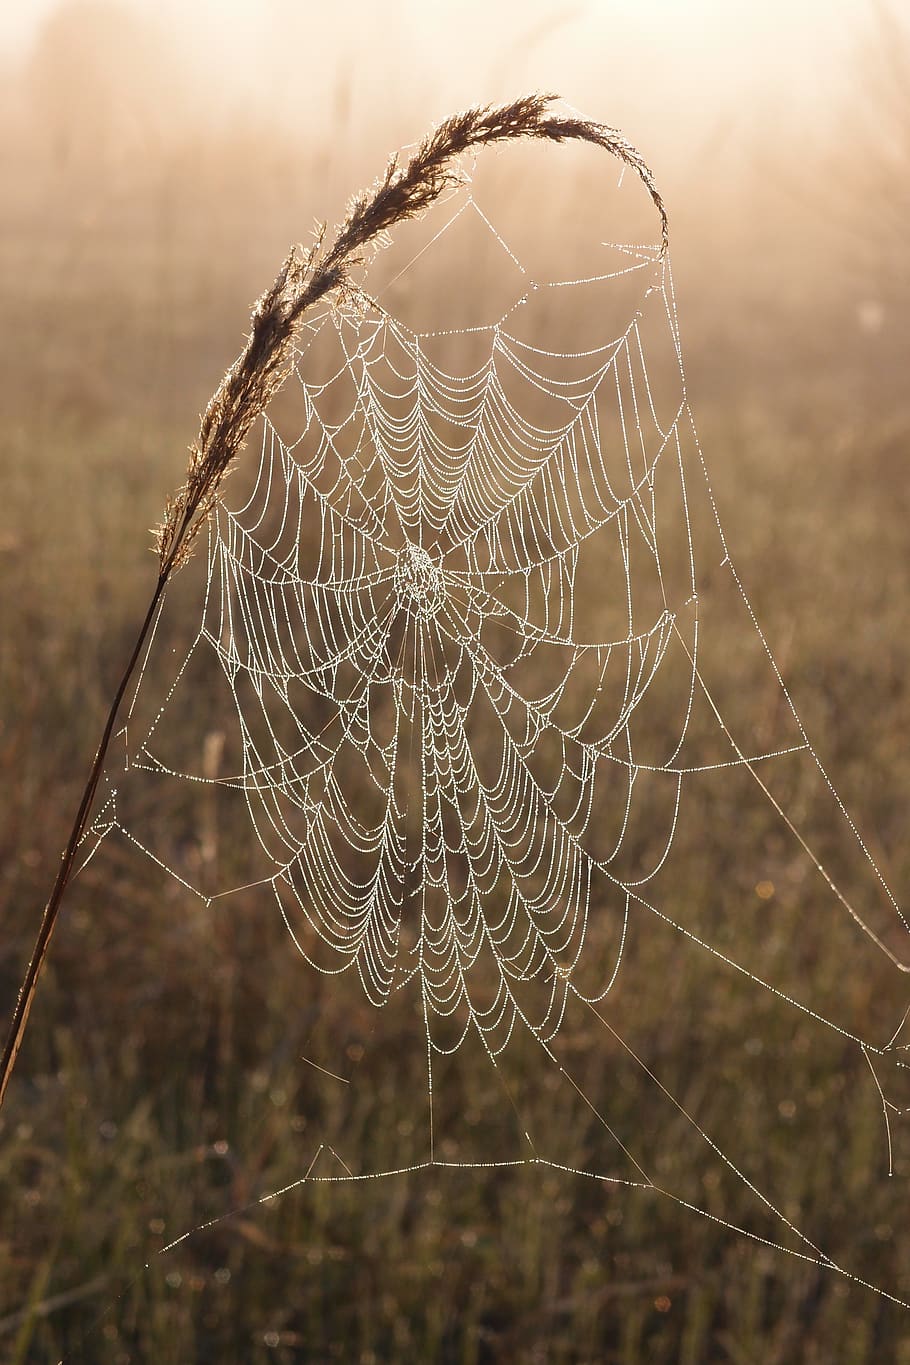 spider web, rosa, morning, wet, lighting, droplets, spider, misty, nature, focus on foreground